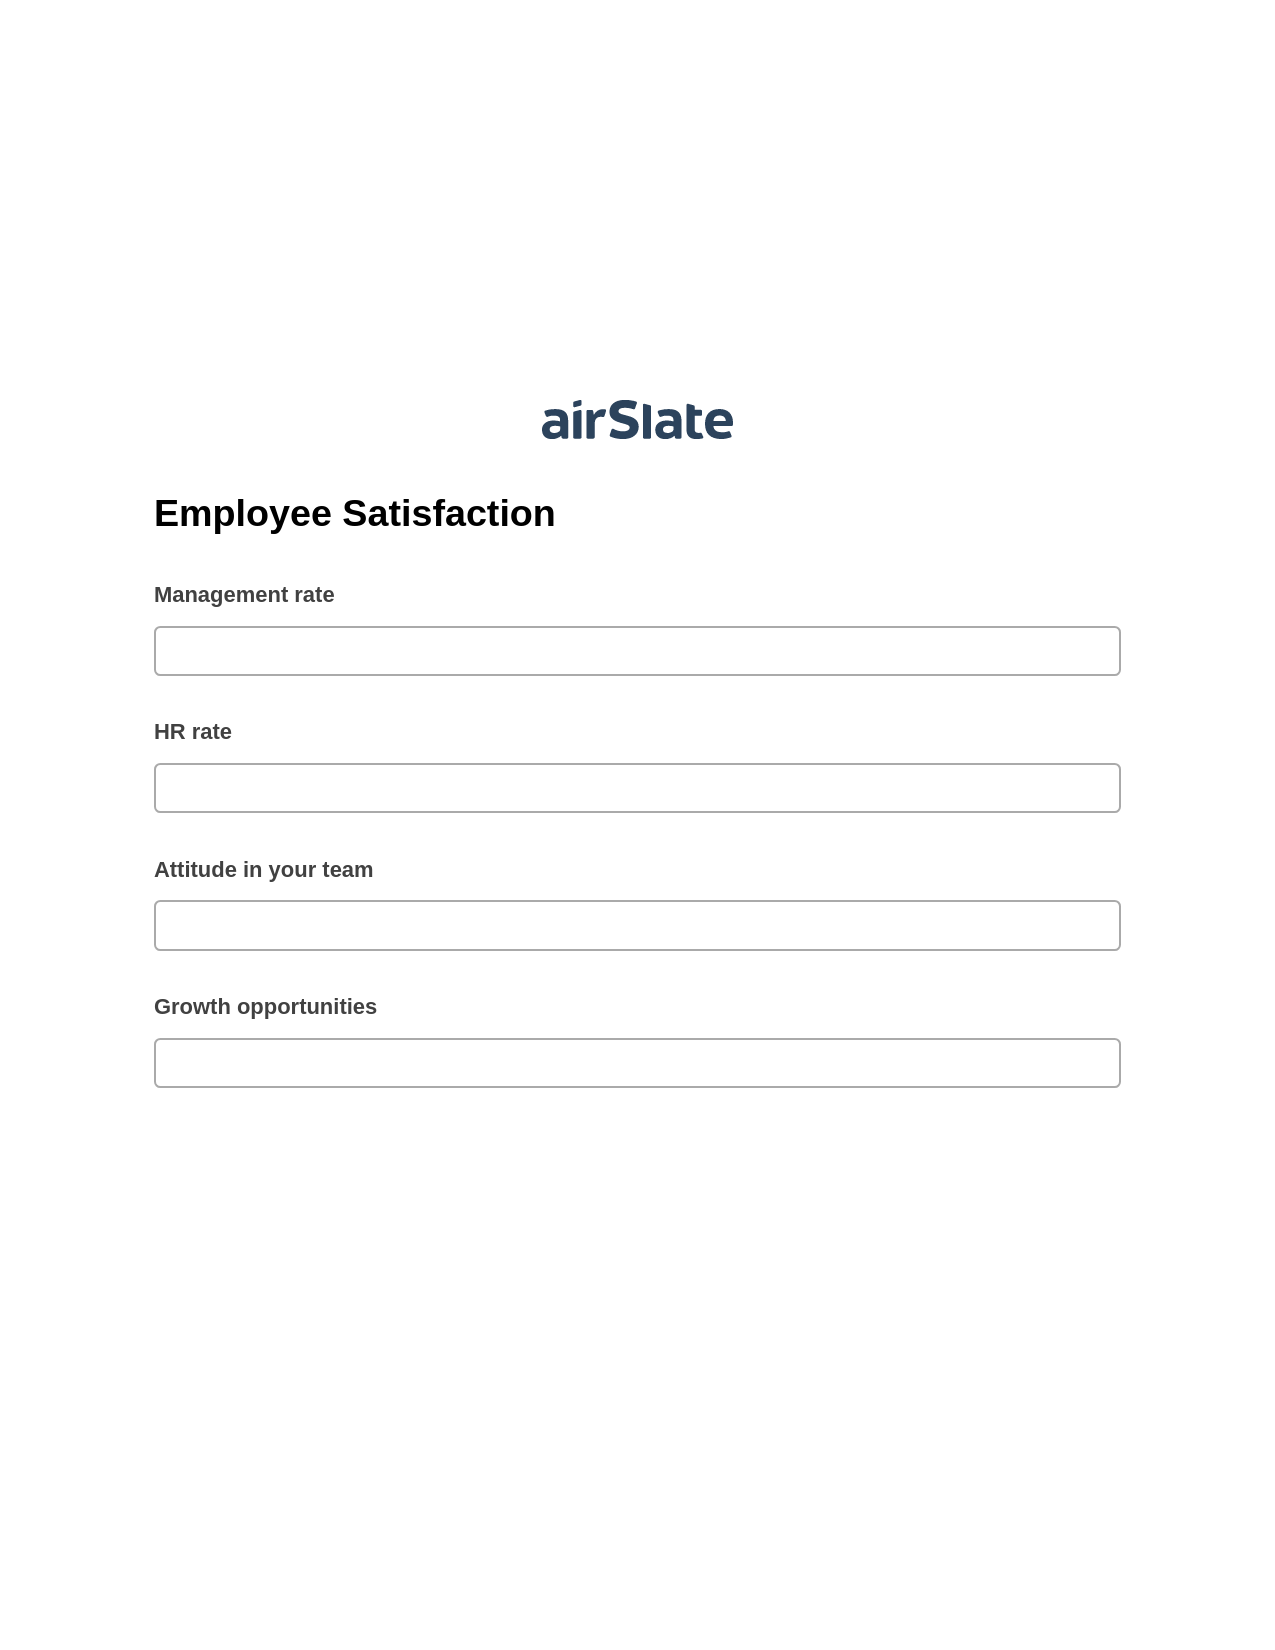 Employee Satisfaction Pre-fill from CSV File Bot, Create QuickBooks invoice Bot, Export to Formstack Documents Bot